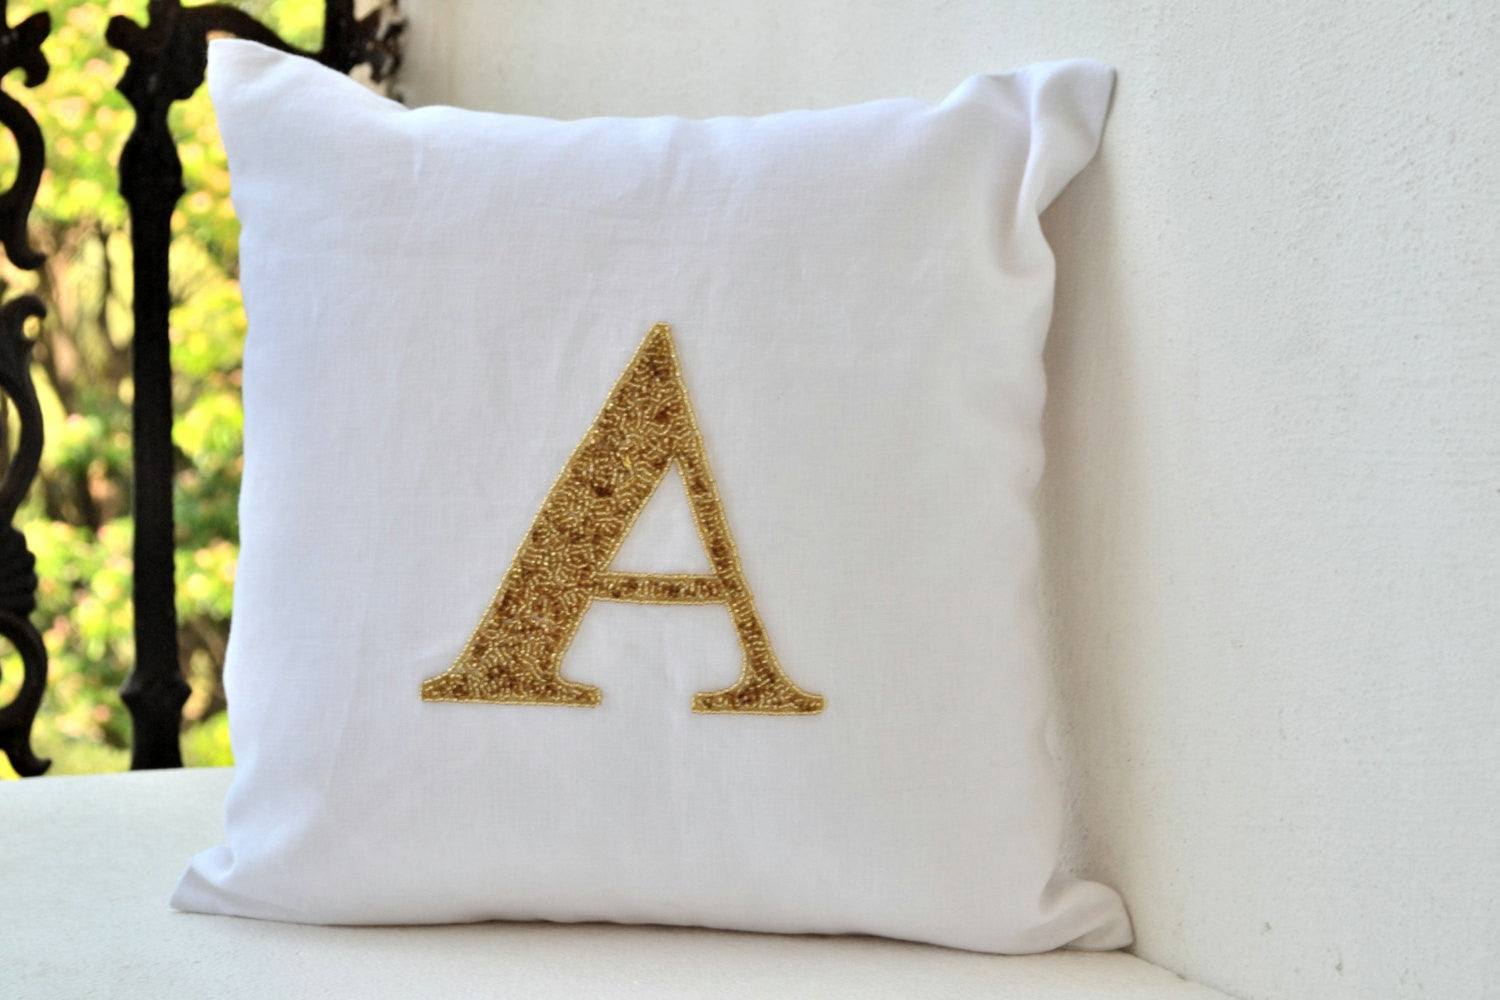 Handmade personalized pillow cover with gold sequin